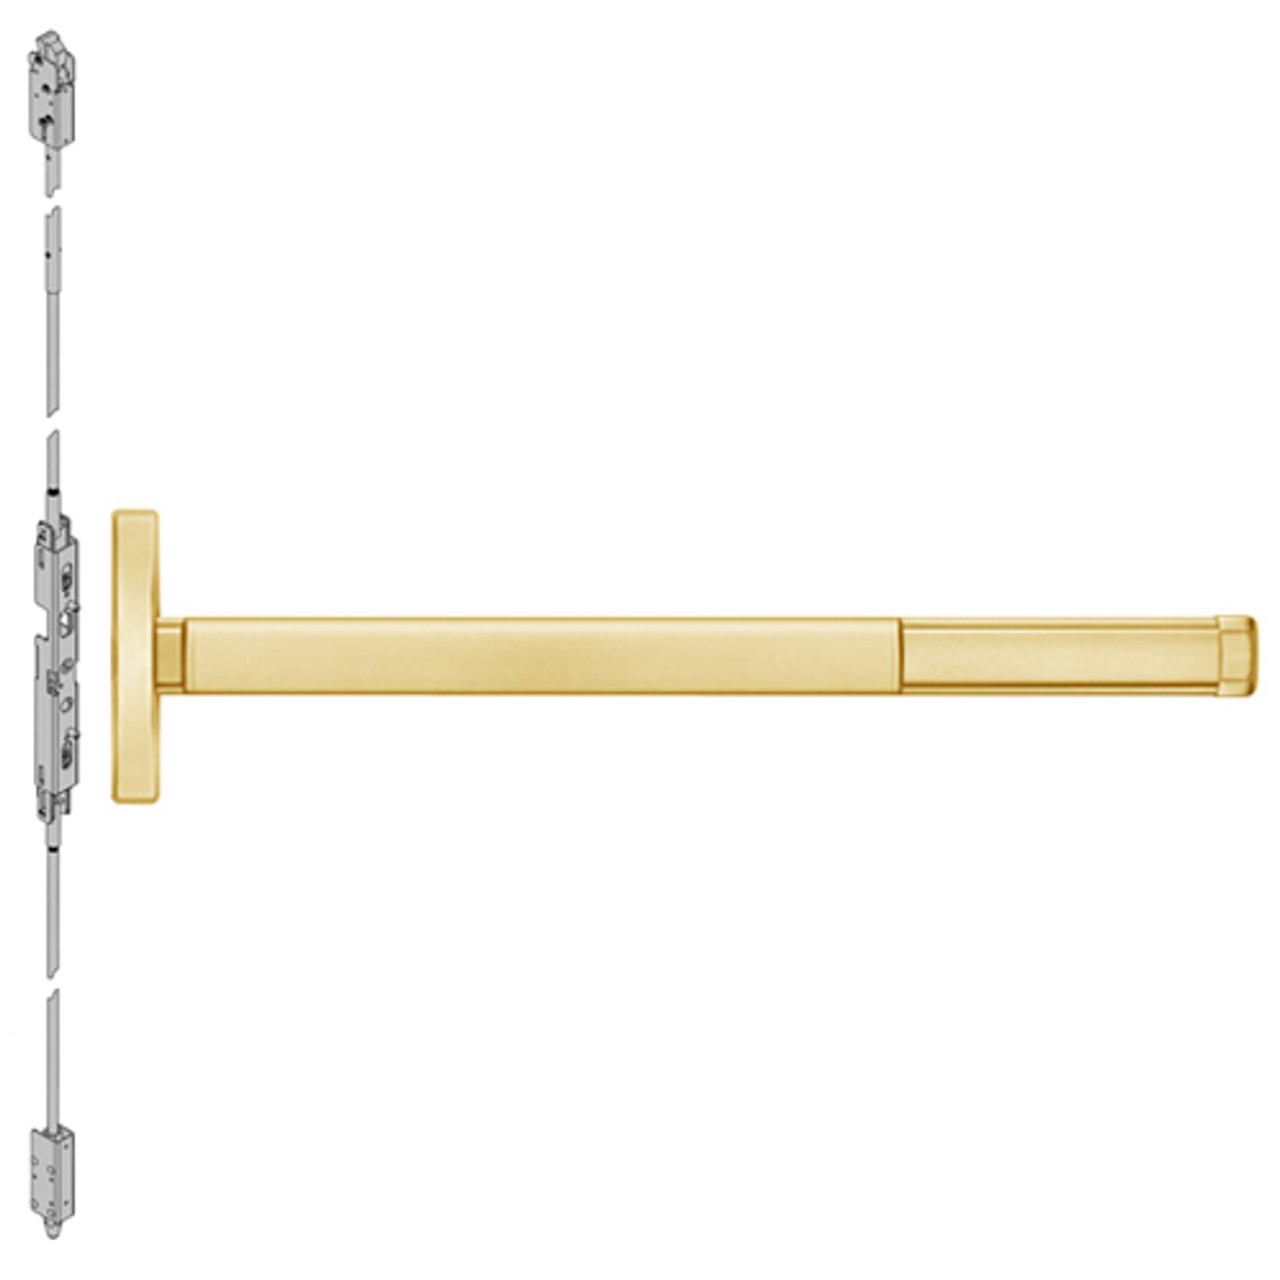 TS2608LBR-605-36 PHI 2600 Series Concealed Vertical Rod Exit Device with Touchbar Monitoring Switch Prepped for Key Controls Lever in Bright Brass Finish